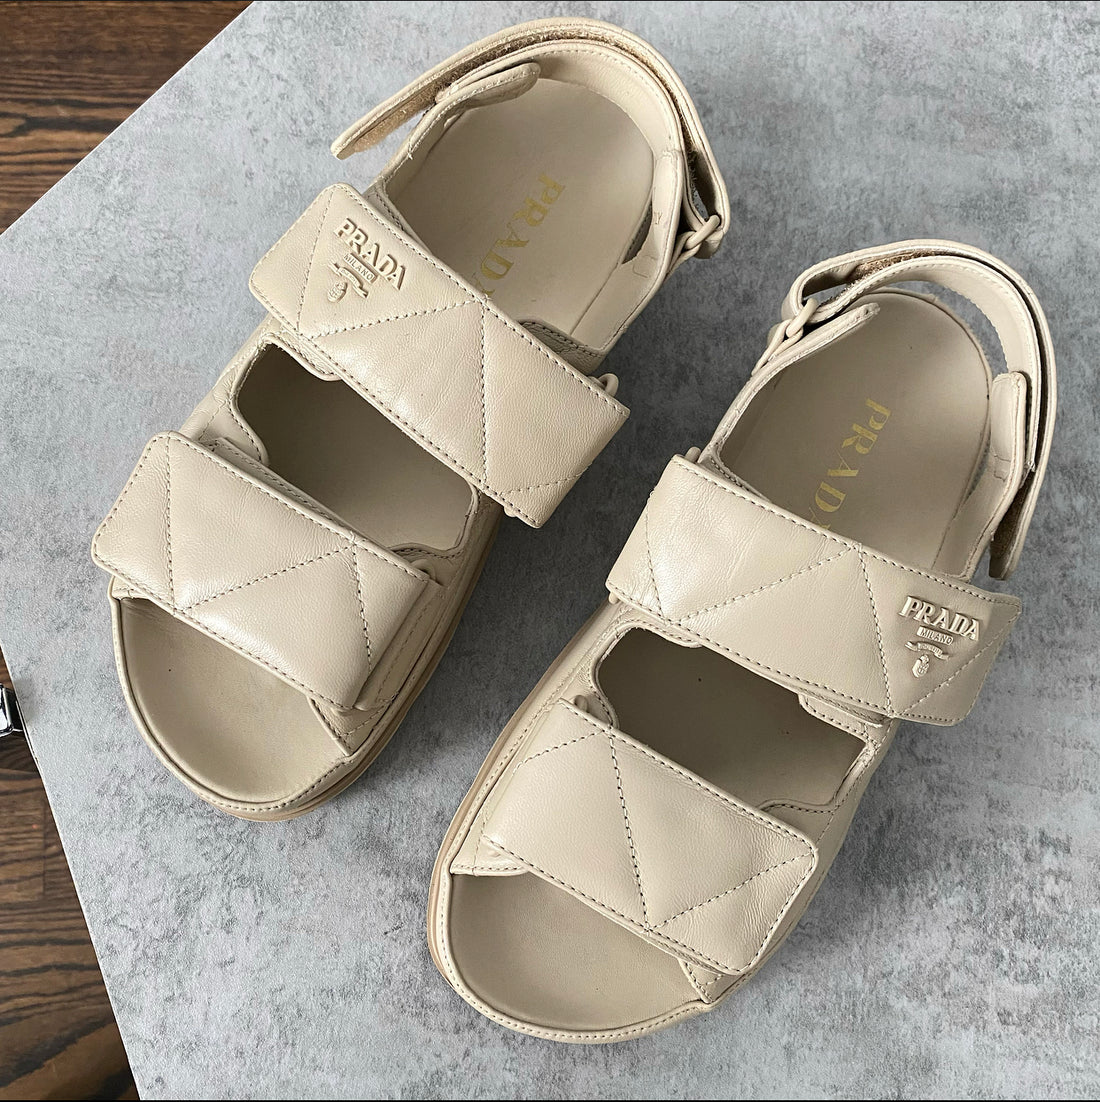 Prada Beige Flat Quilted Leather Sandals - 37 / 7